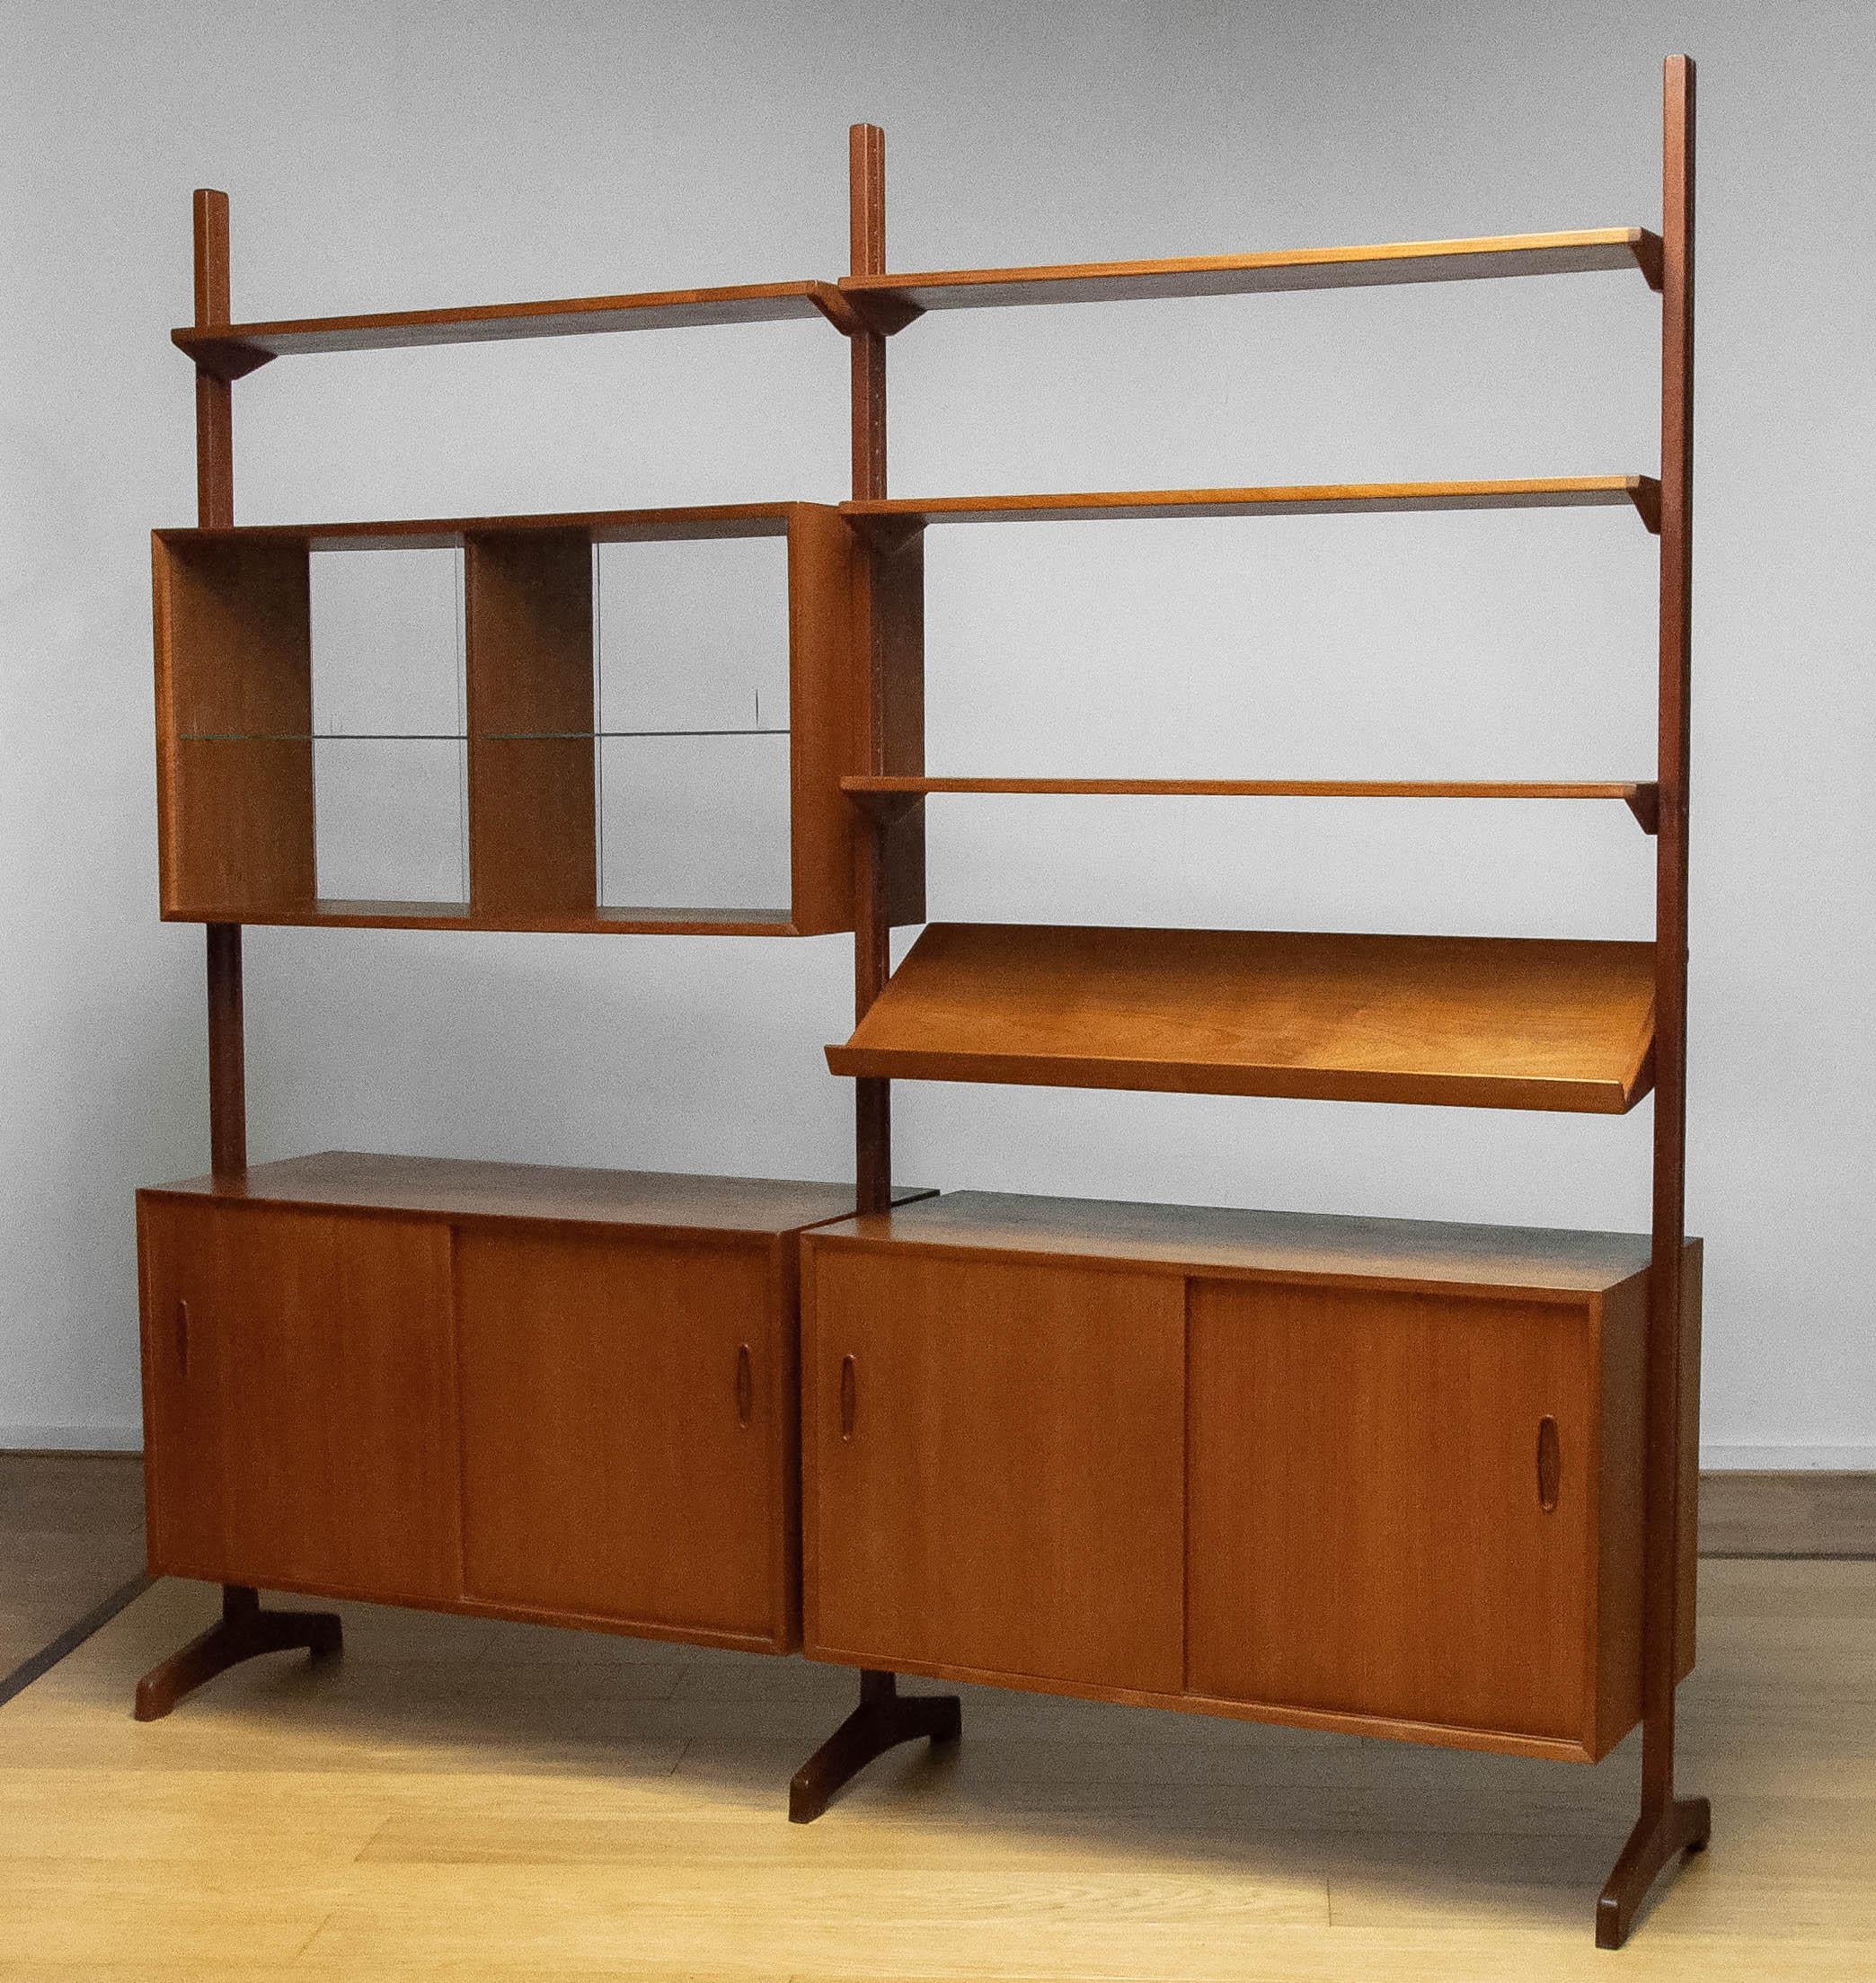 Beautiful teak 'all in one' masterpiece cabinet 'model Domi' designed by Nils Jonsson for Hugo Troeds Sweden. ( displayed in the Bra Bohag catalogue ) This fee standing modular system can de used as a room divider as well. All shelfs are adjustable